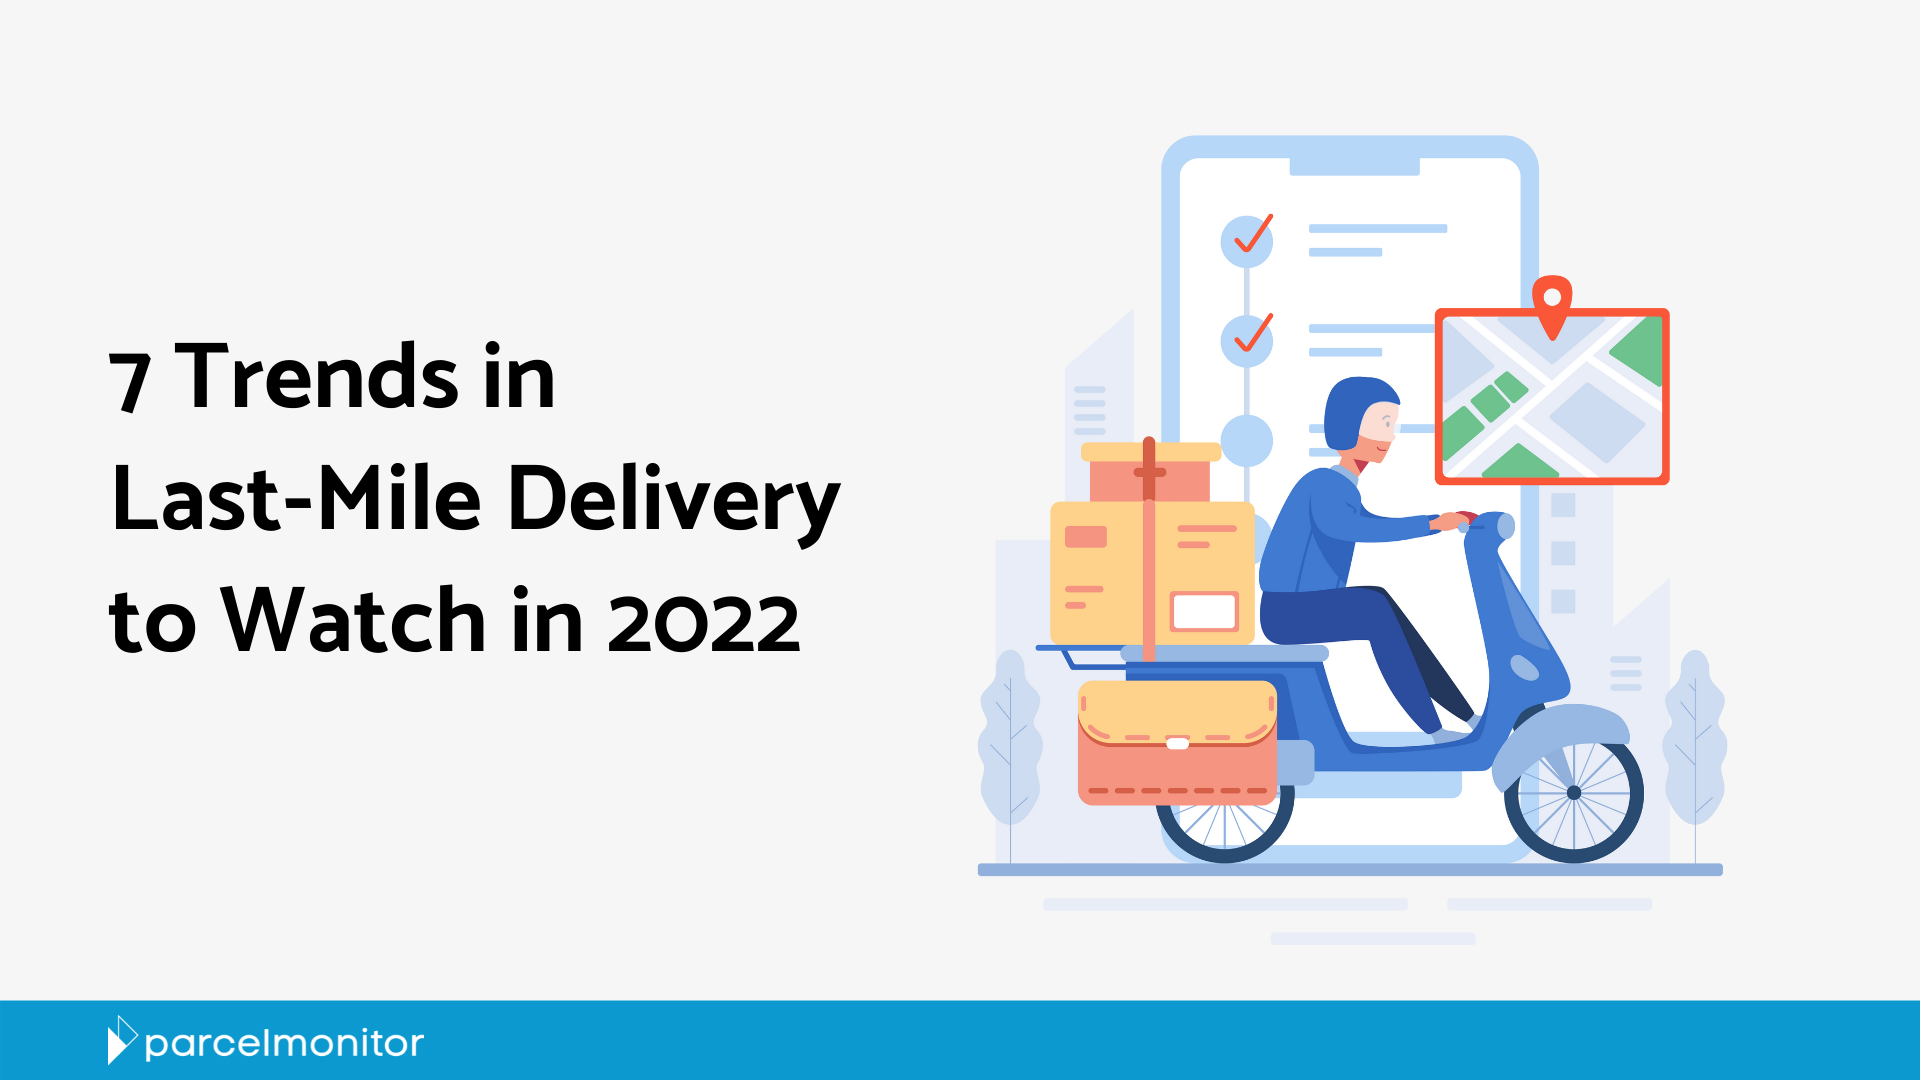 Parcel Monitor: 7 Trends in Last-Mile Delivery to Watch in 2022